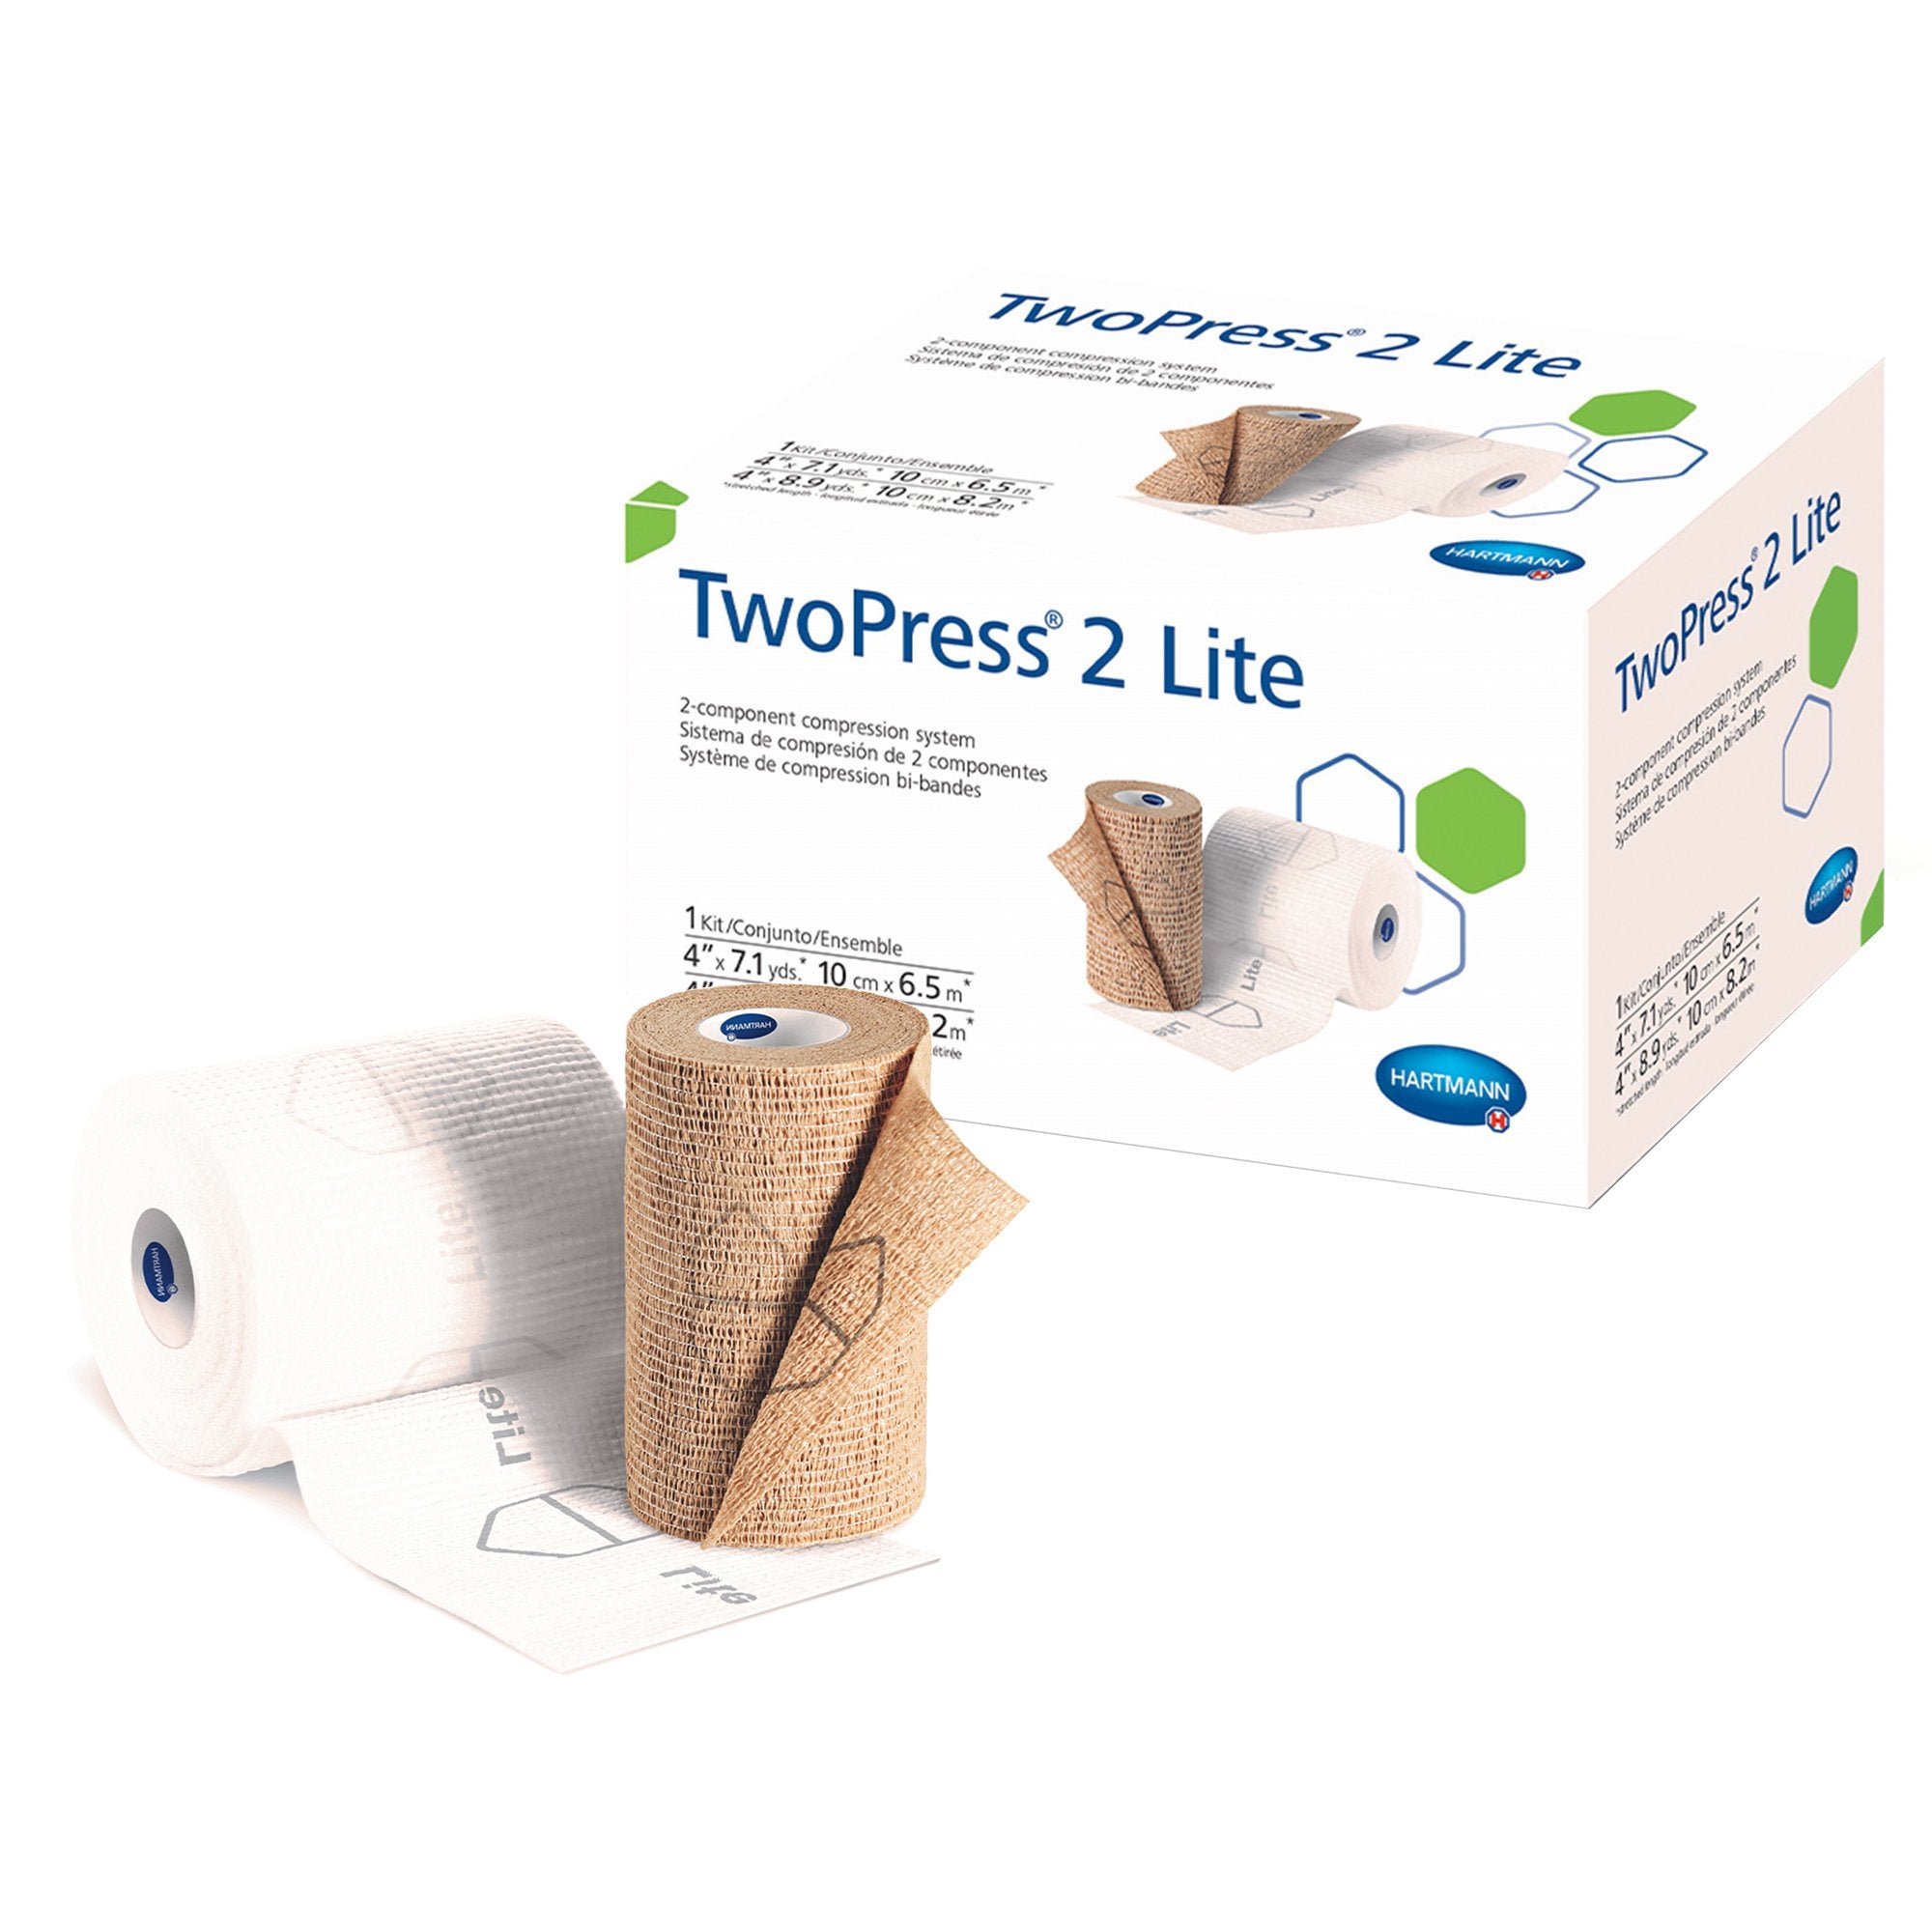 2 Layer Compression Bandage System with Visible Indicators TwoPress 2 Lite 4 Inch X 7.1 Yard / 4 Inch X 8.9 Yard Standard Compression Self-adherent Closure Tan / White NonSterile